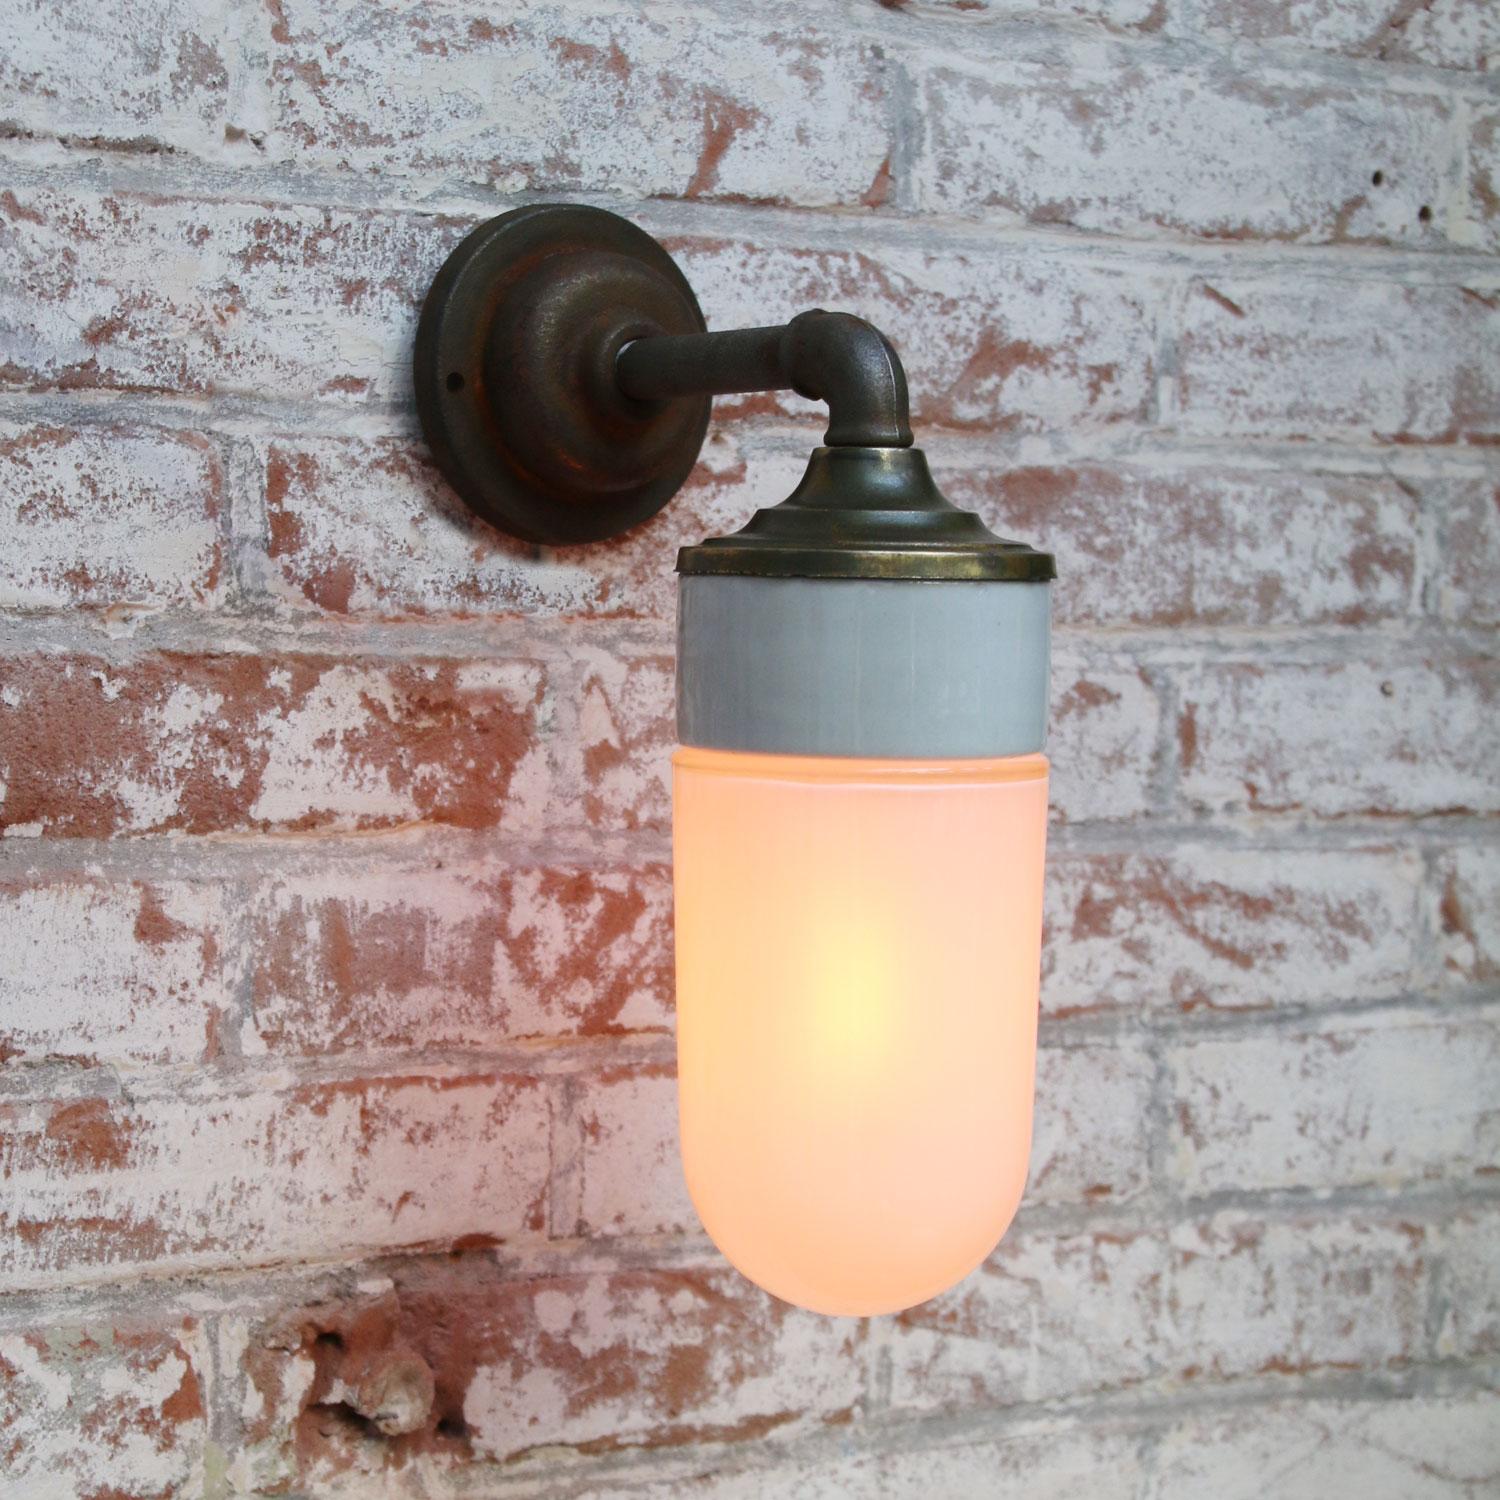 Porcelain Industrial wall lamp.
White porcelain, brass and cast iron
Opaline Milk glass.
2 conductors, no ground.

Diameter cast iron wall piece 10.5 cm / 4”.
2 holes to secure.

Weight: 2.10 kg / 4.6 lb

Priced per individual item. All lamps have